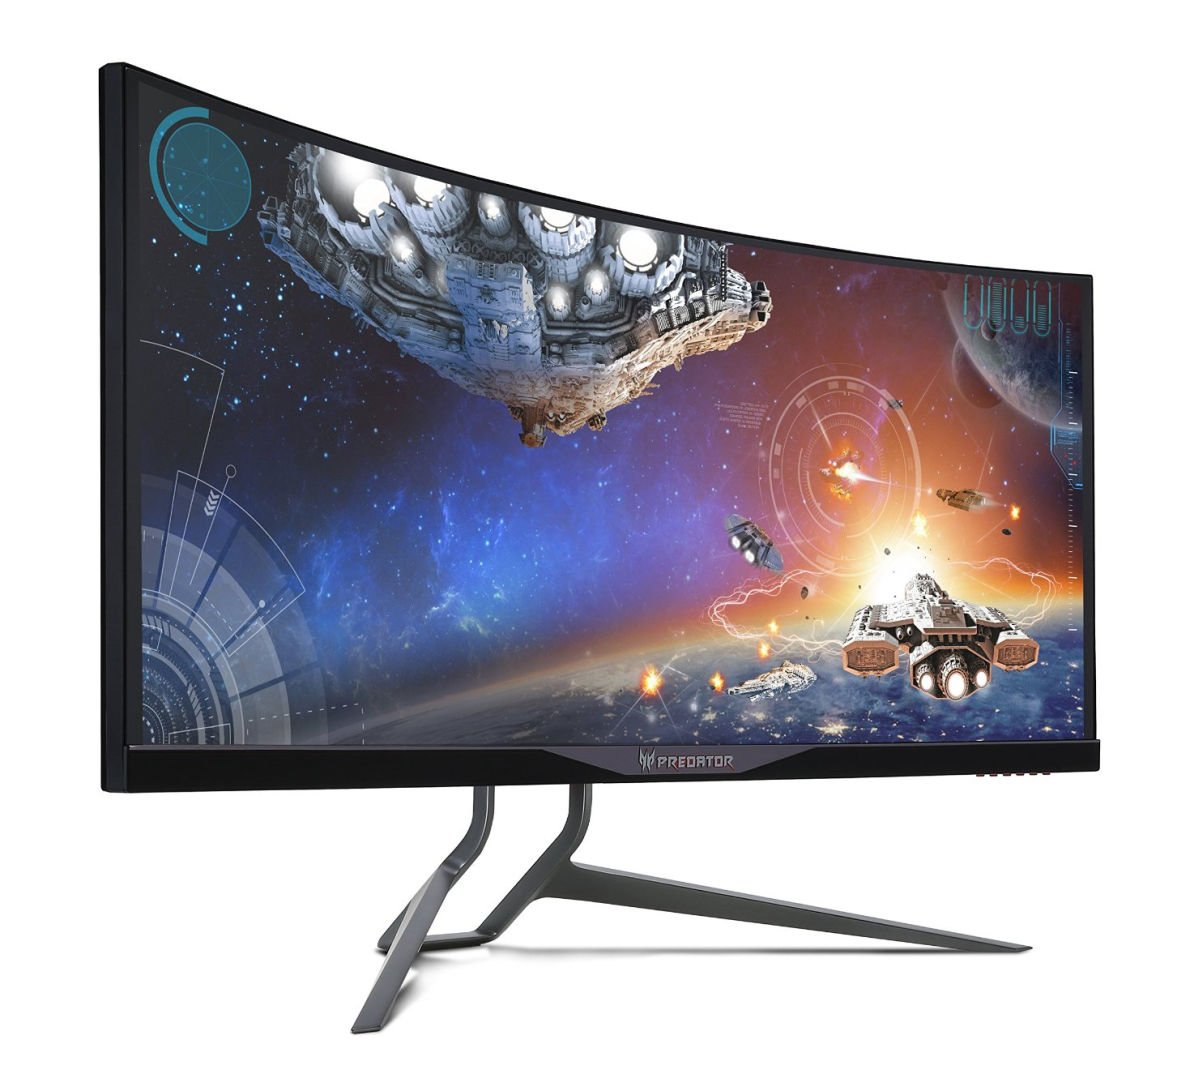 Acer Predator X34 curved gaming monitor